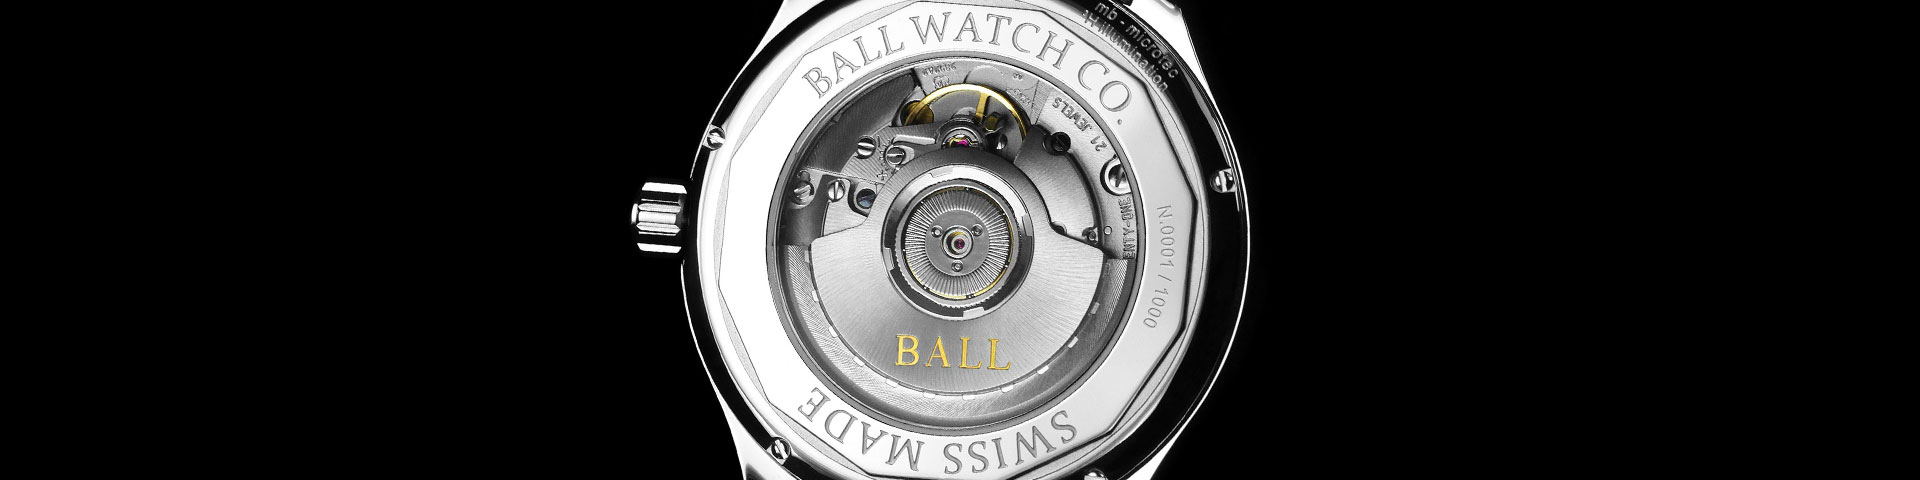 Welcome to BALL Watch - Standard Time 135 Anniversary